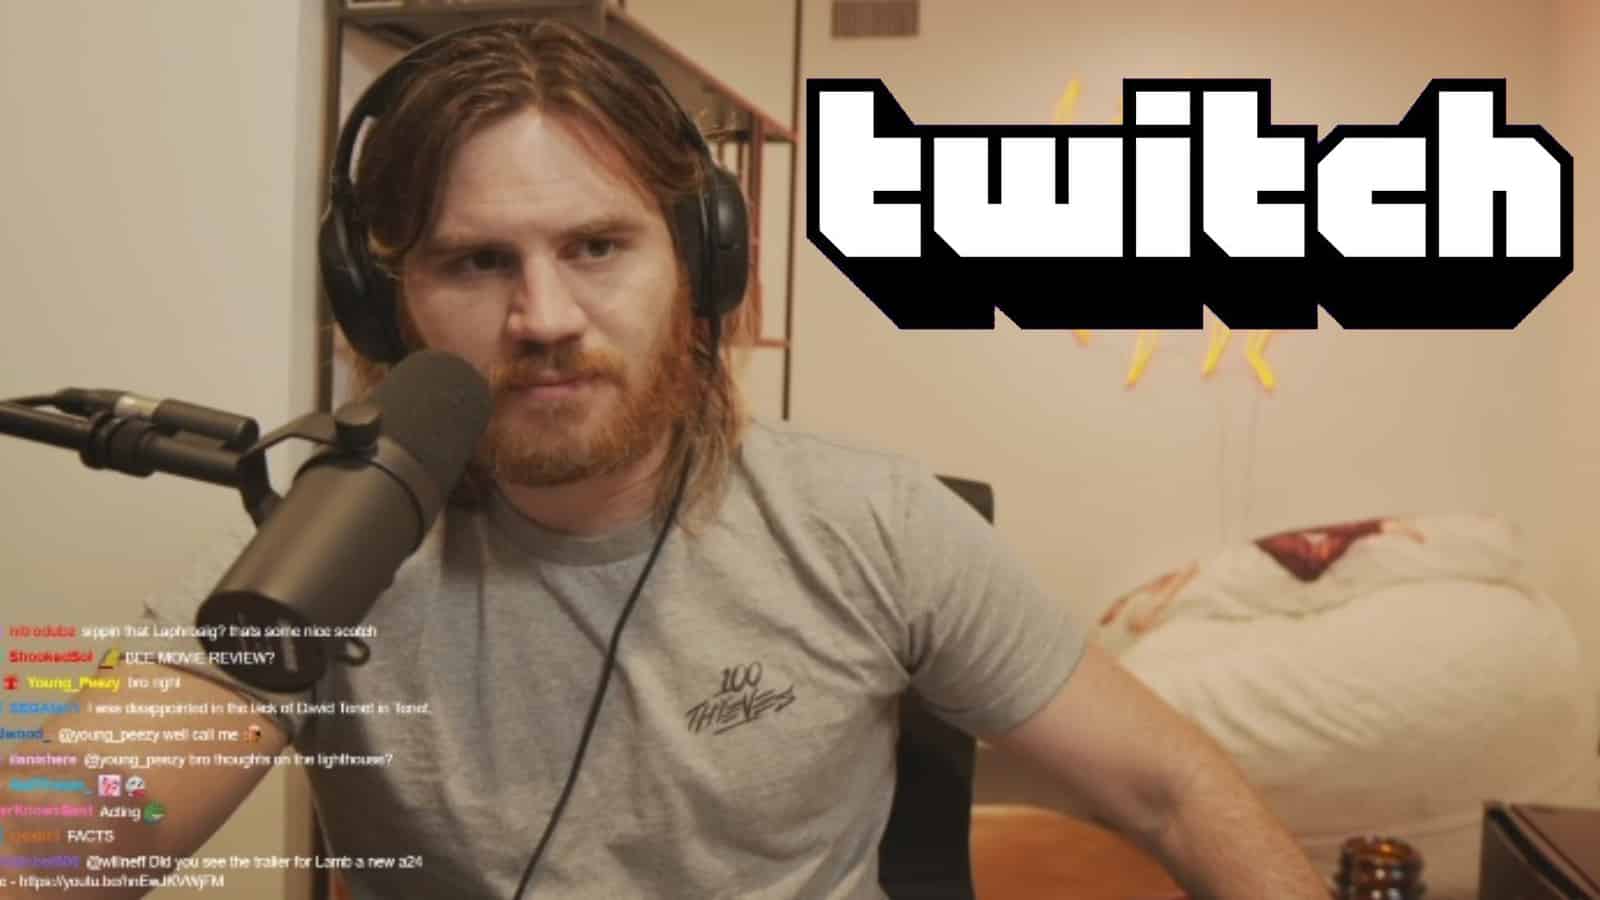 Will Neff banned on twitch